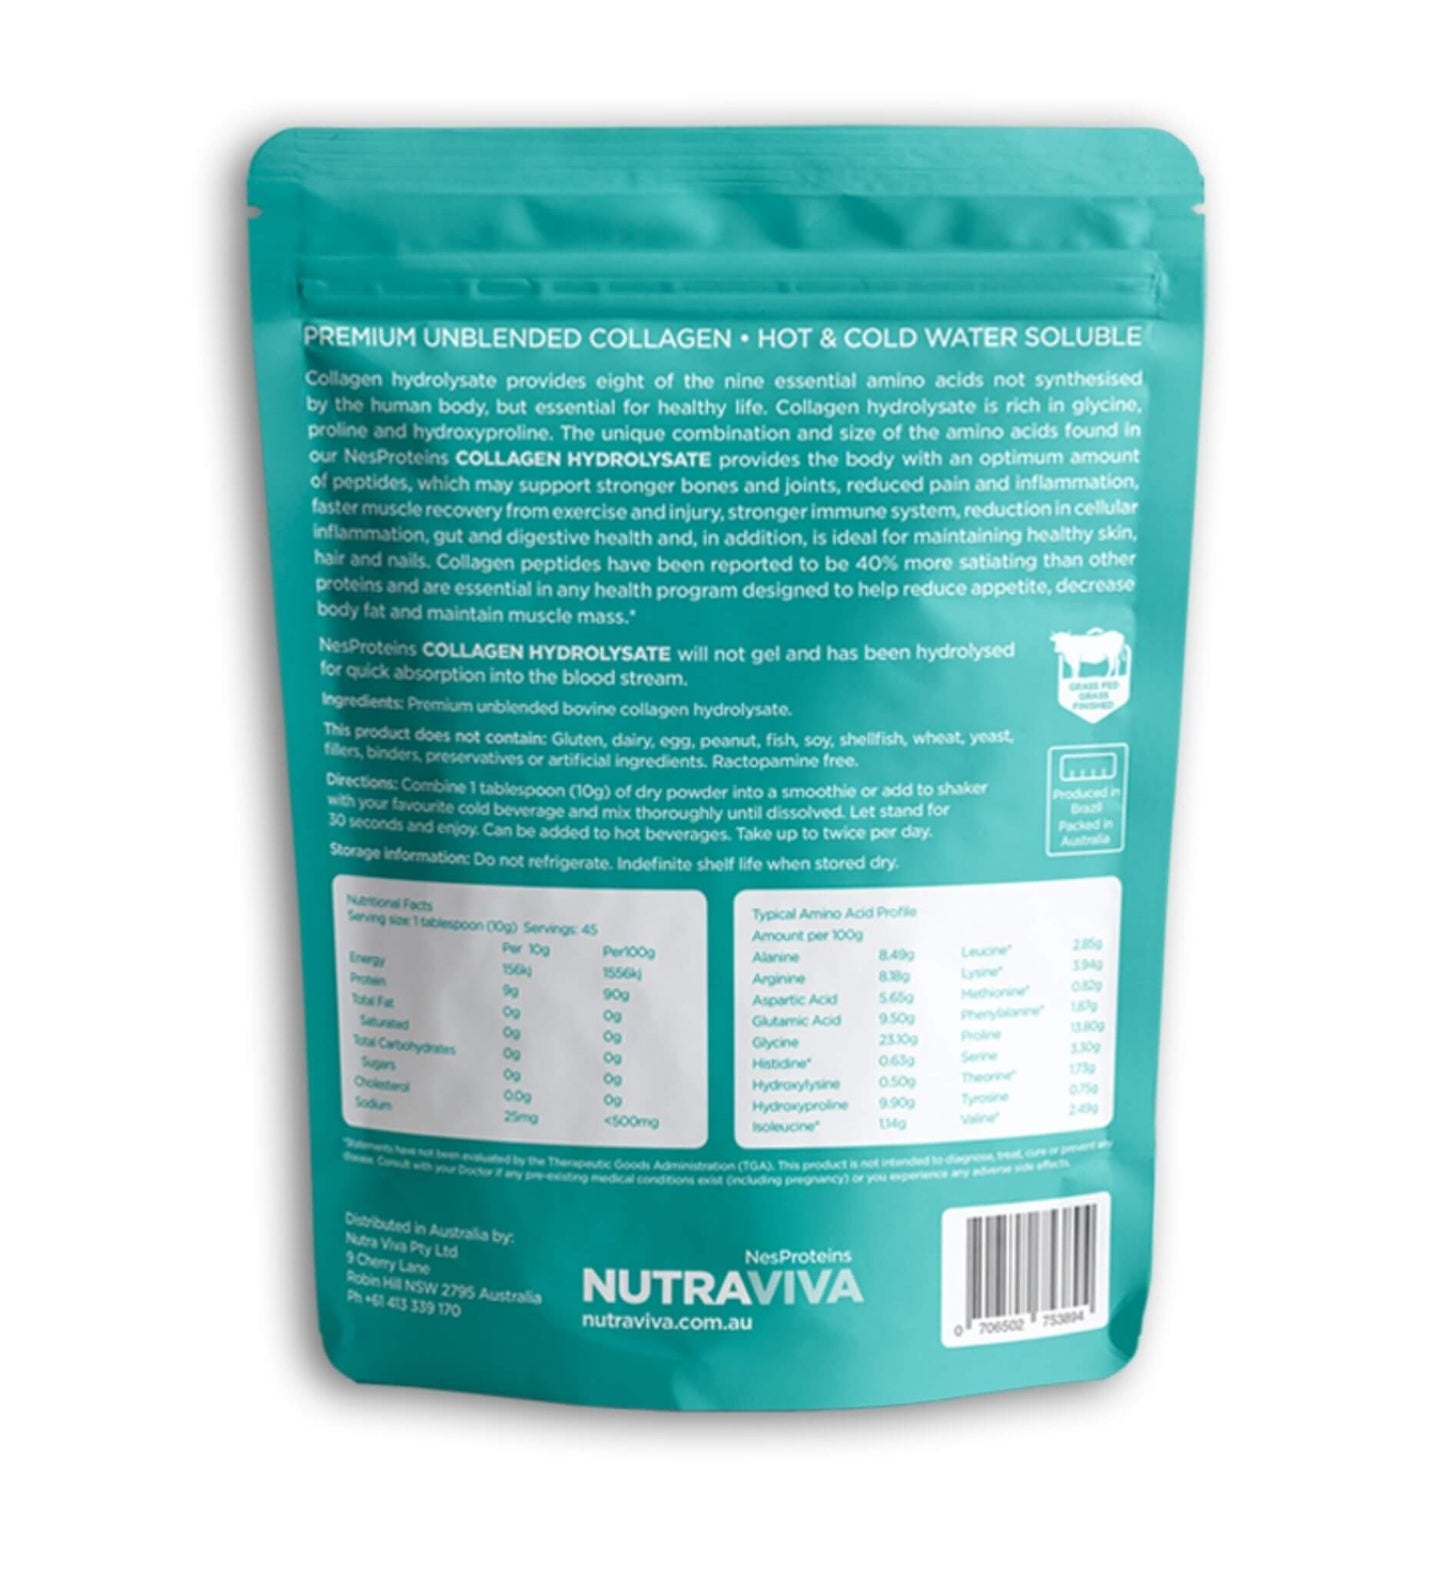 collagen hydrolysate back of pack